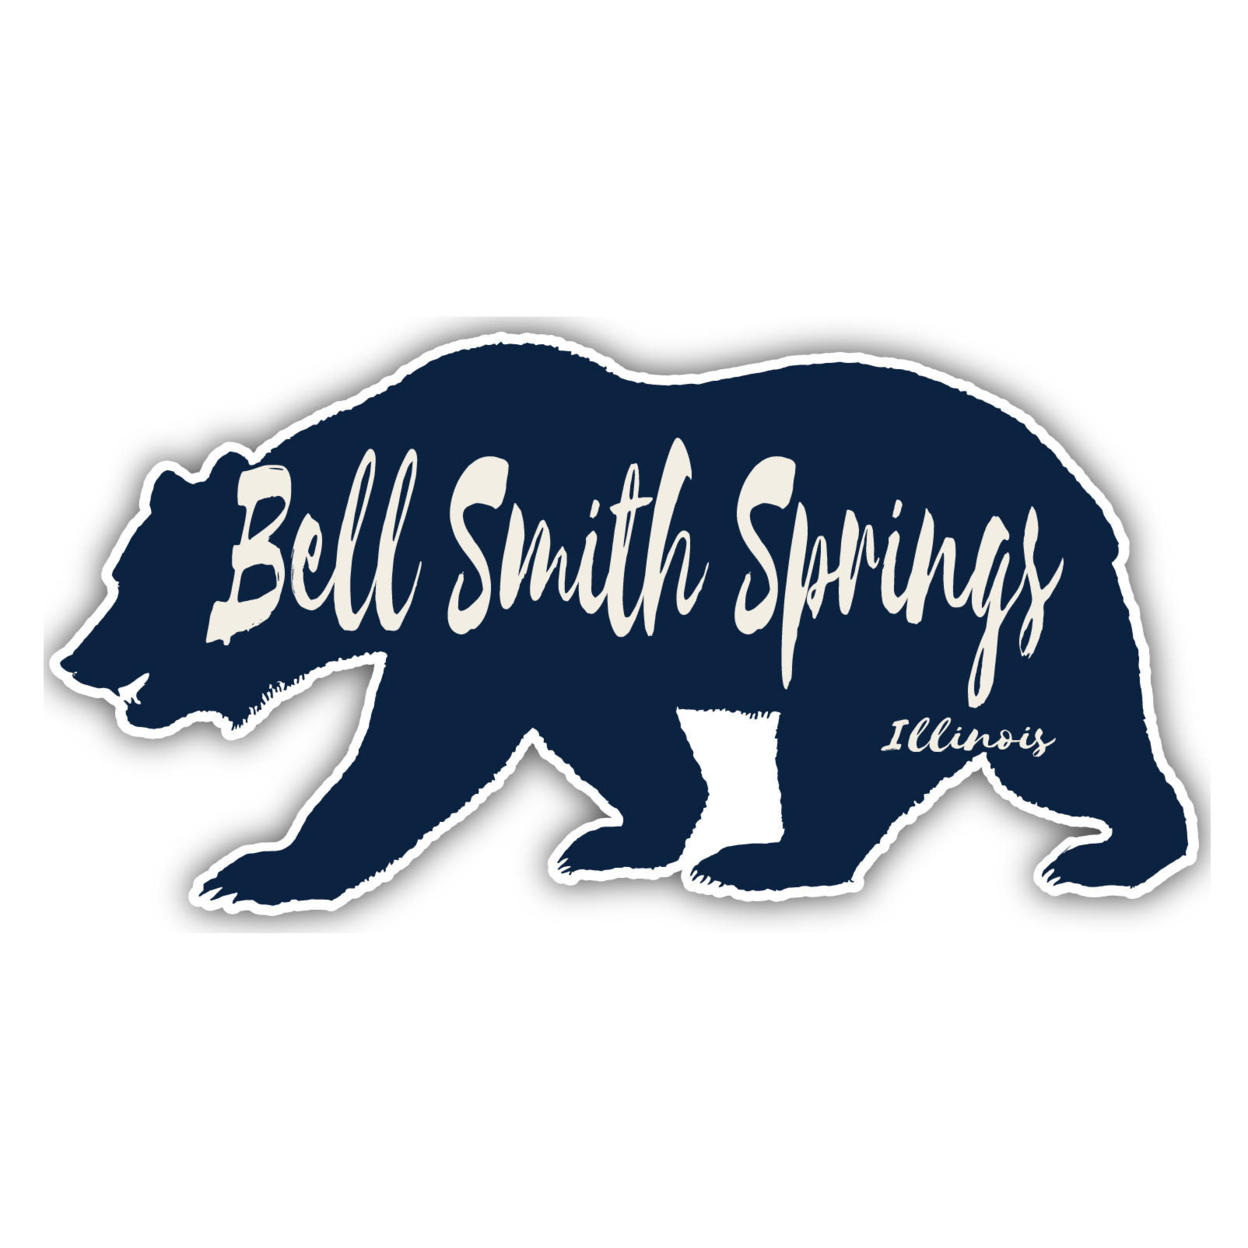 Bell Smith Springs Illinois Souvenir Decorative Stickers (Choose Theme And Size) - Single Unit, 10-Inch, Camp Life